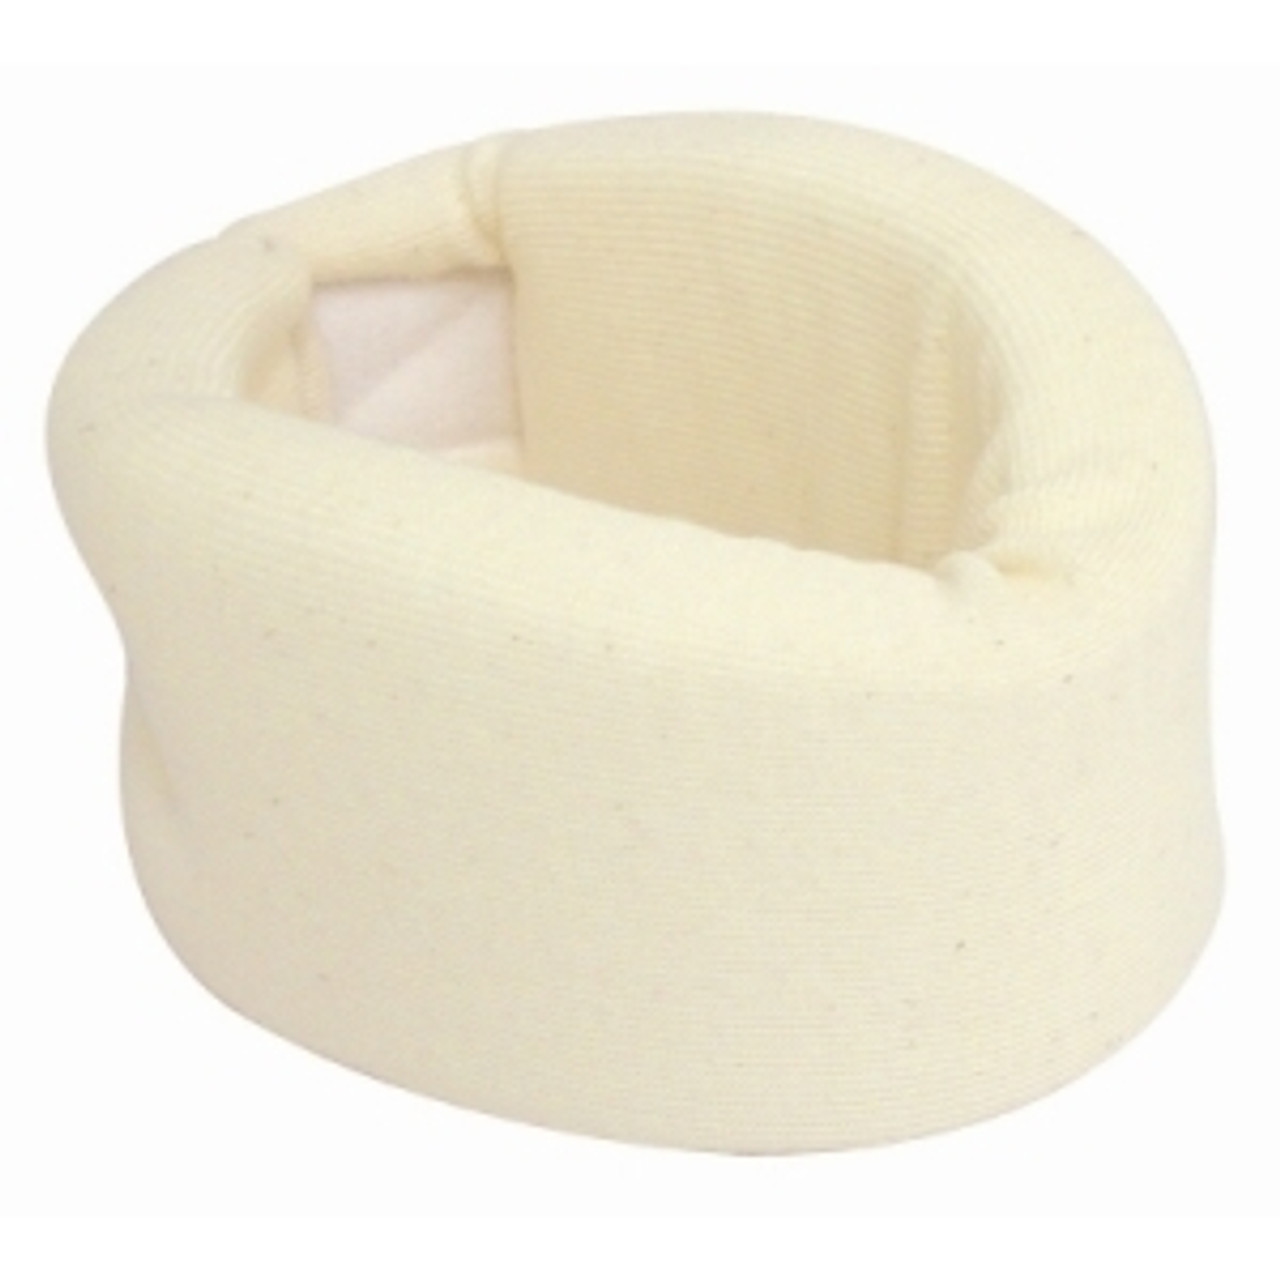 Soft Foam Cervical Collar, 3 wide by Briggs Healthcare